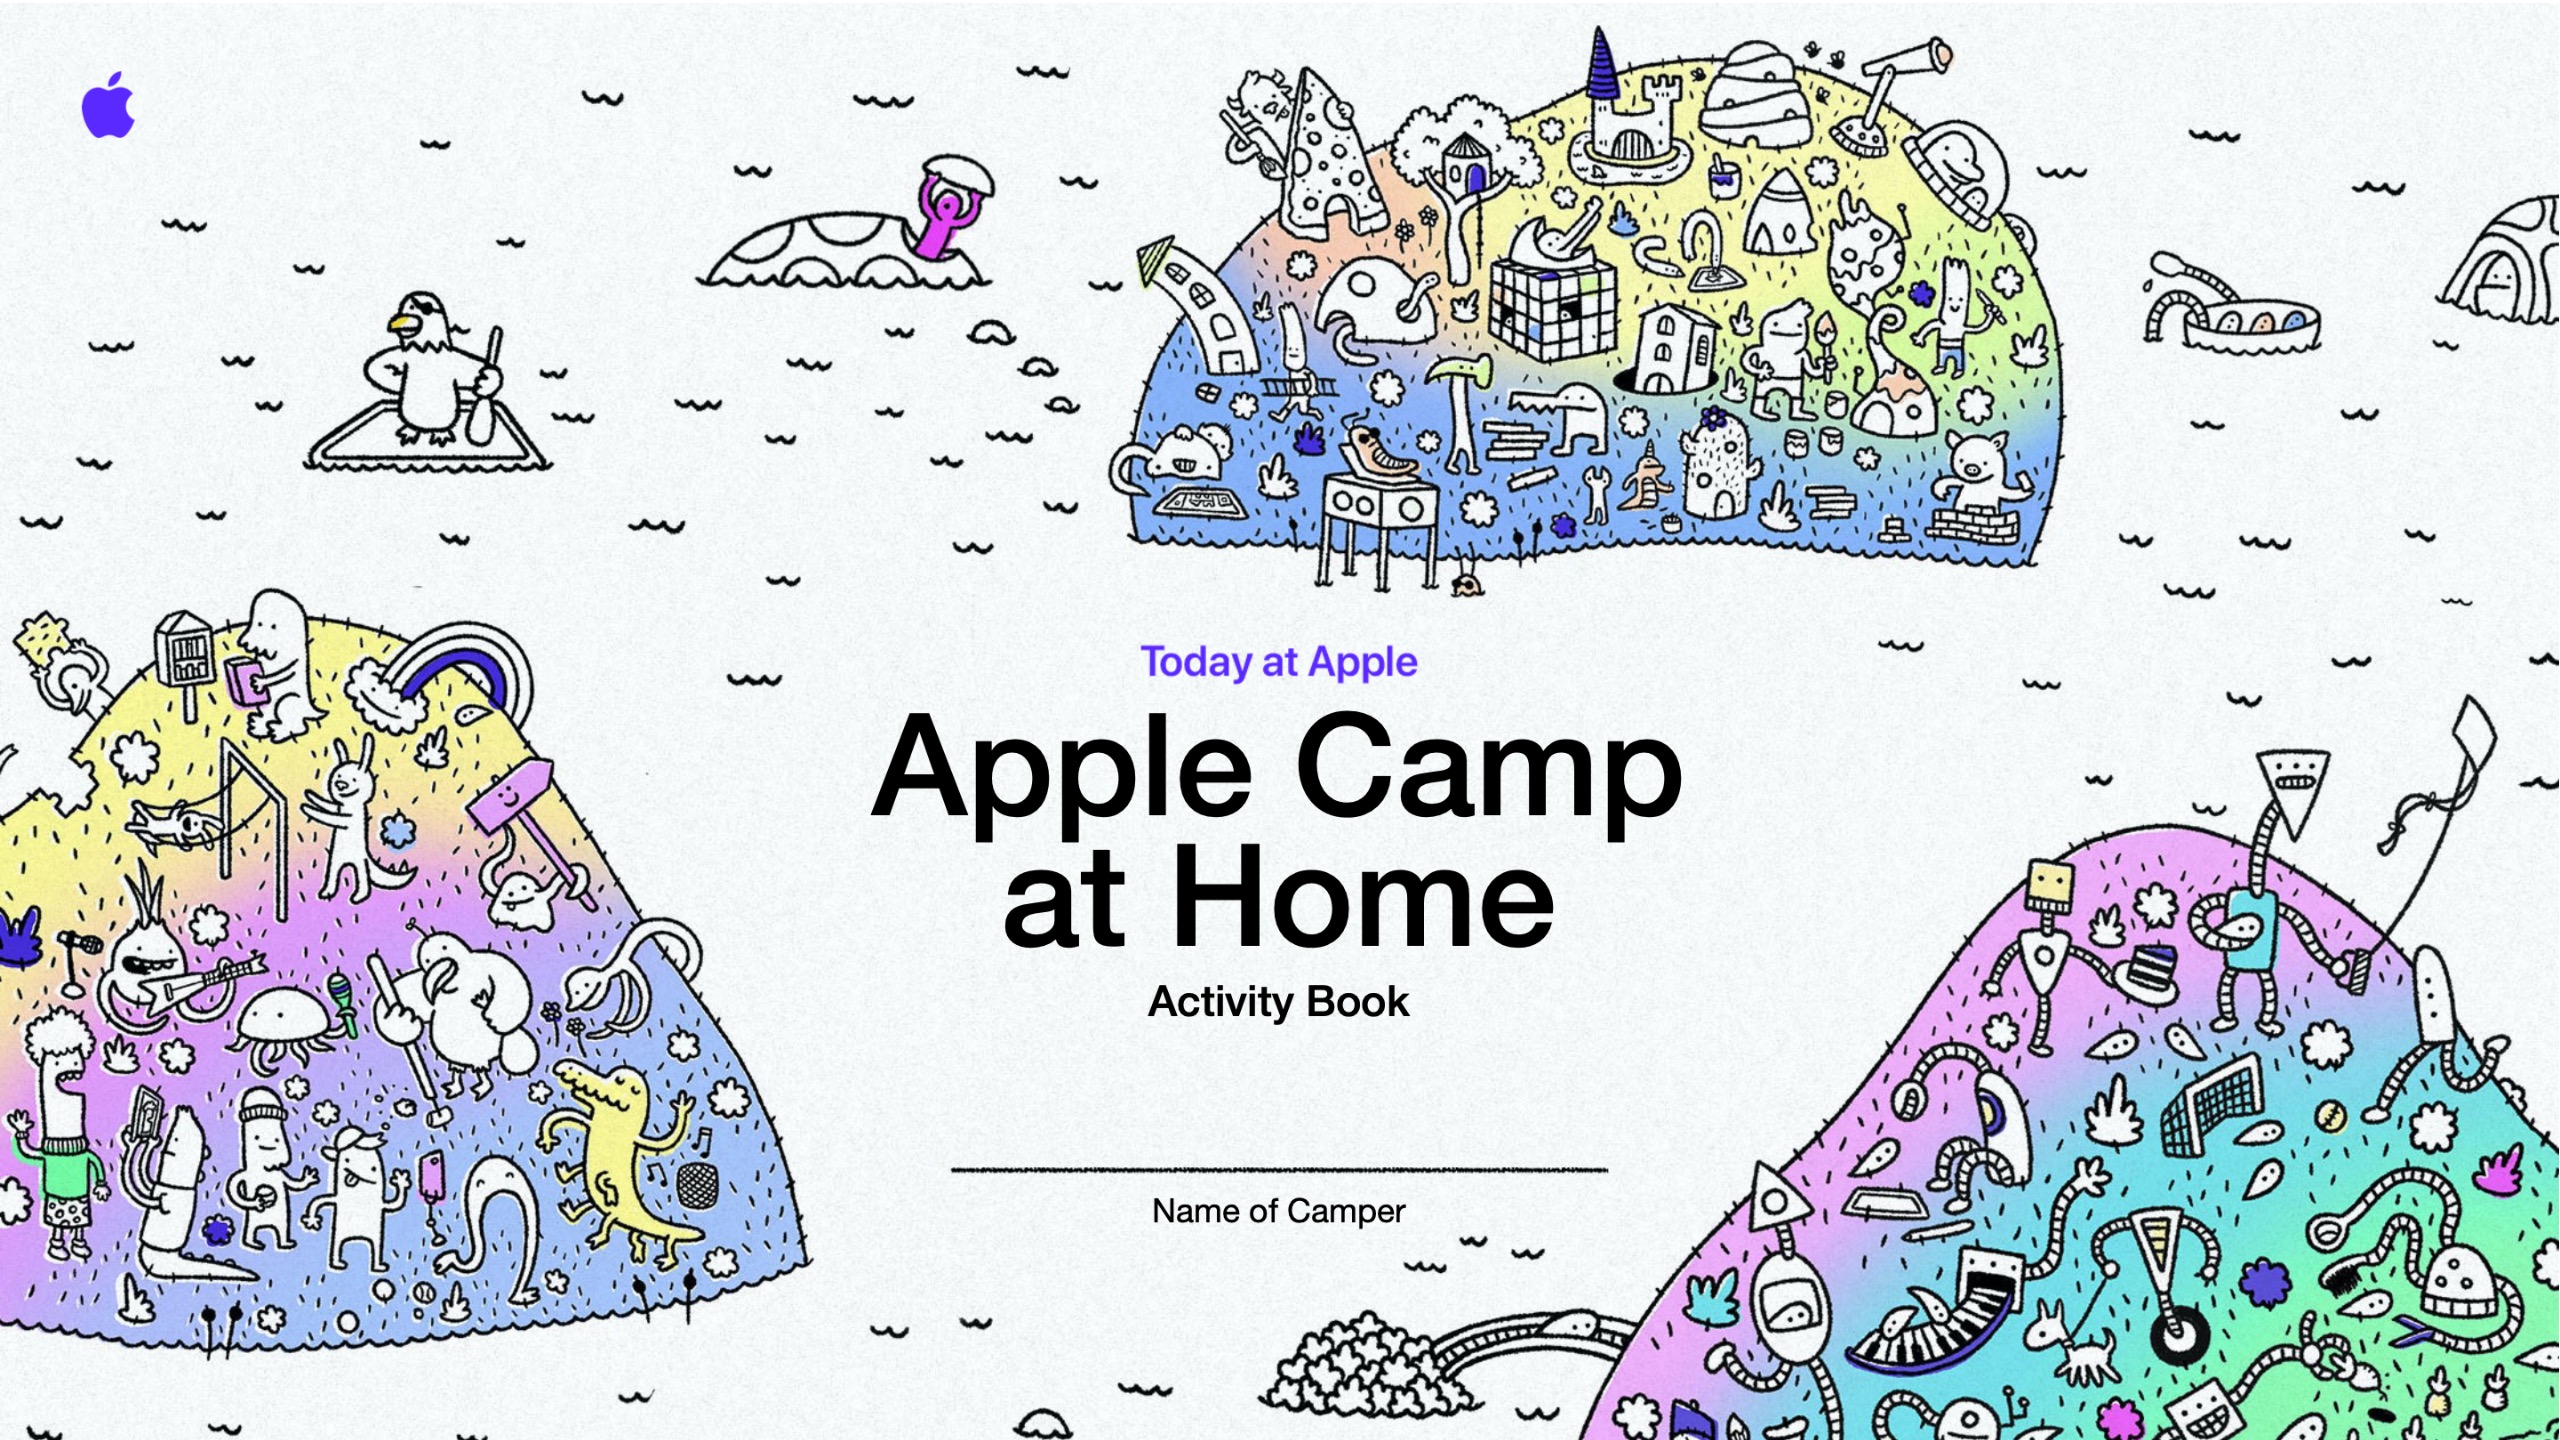 Apple Camp at Home registration now open with free creative Activity